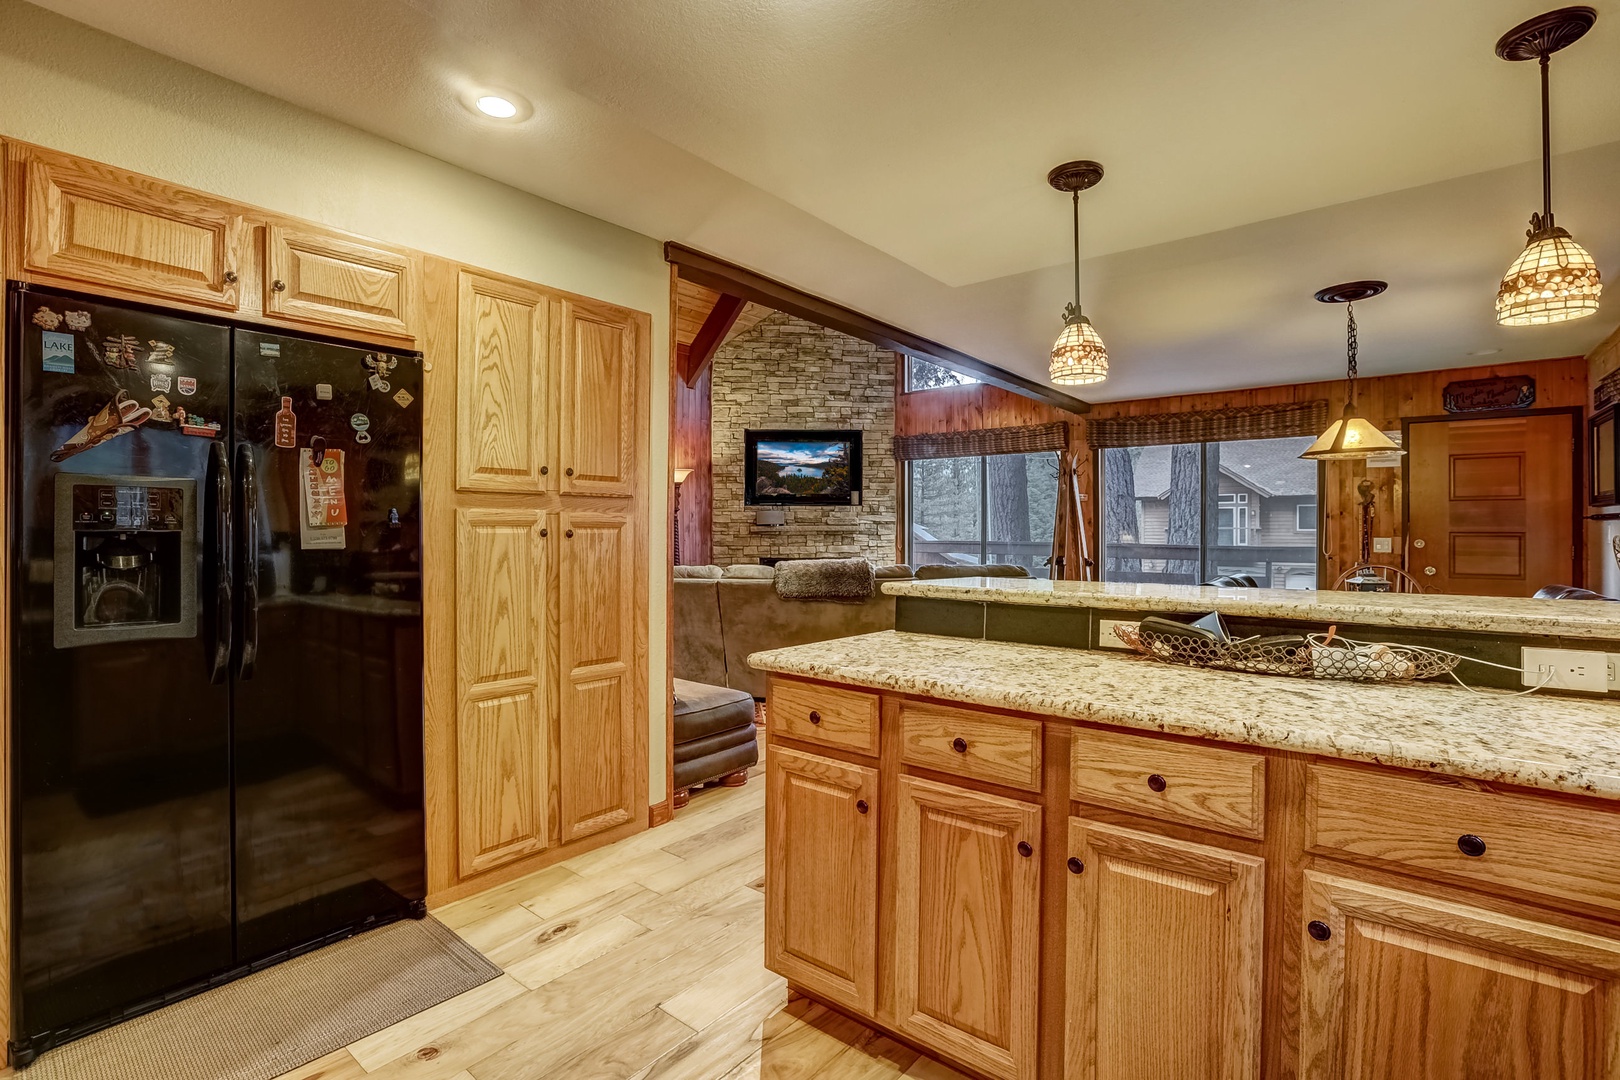 Kitchen with drip coffee maker, Keurig, toaster, and more